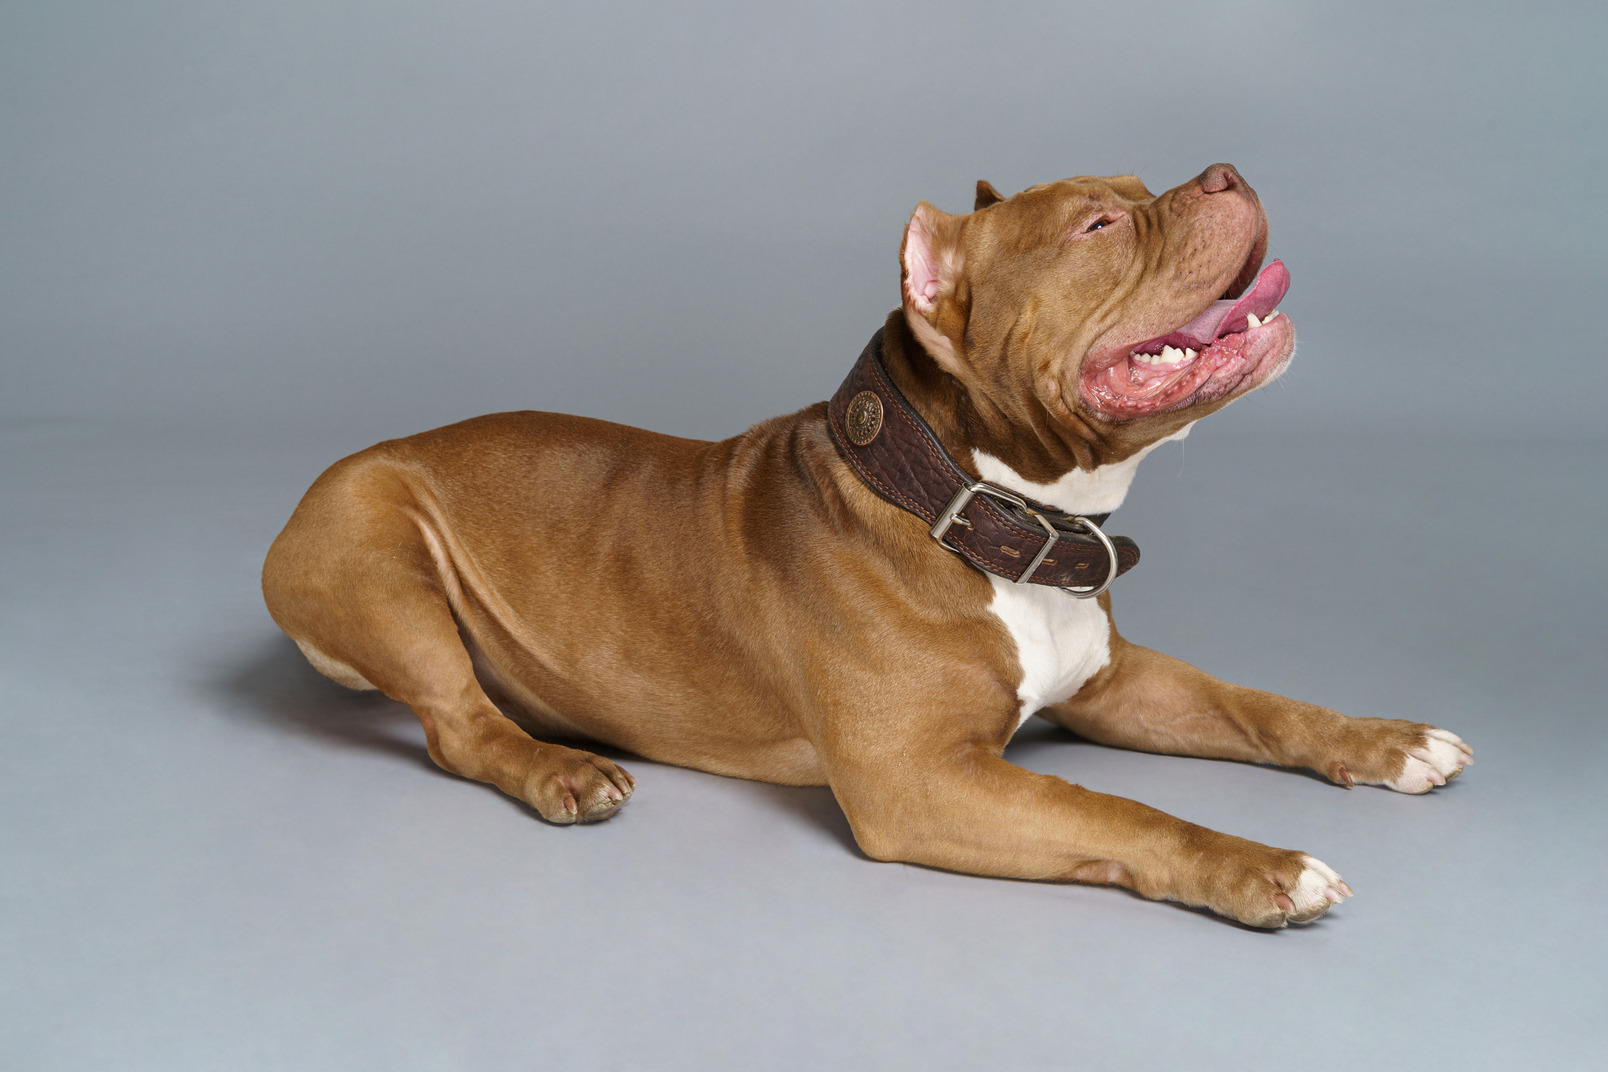 Side view of a lying bulldog in a dog collar looking up